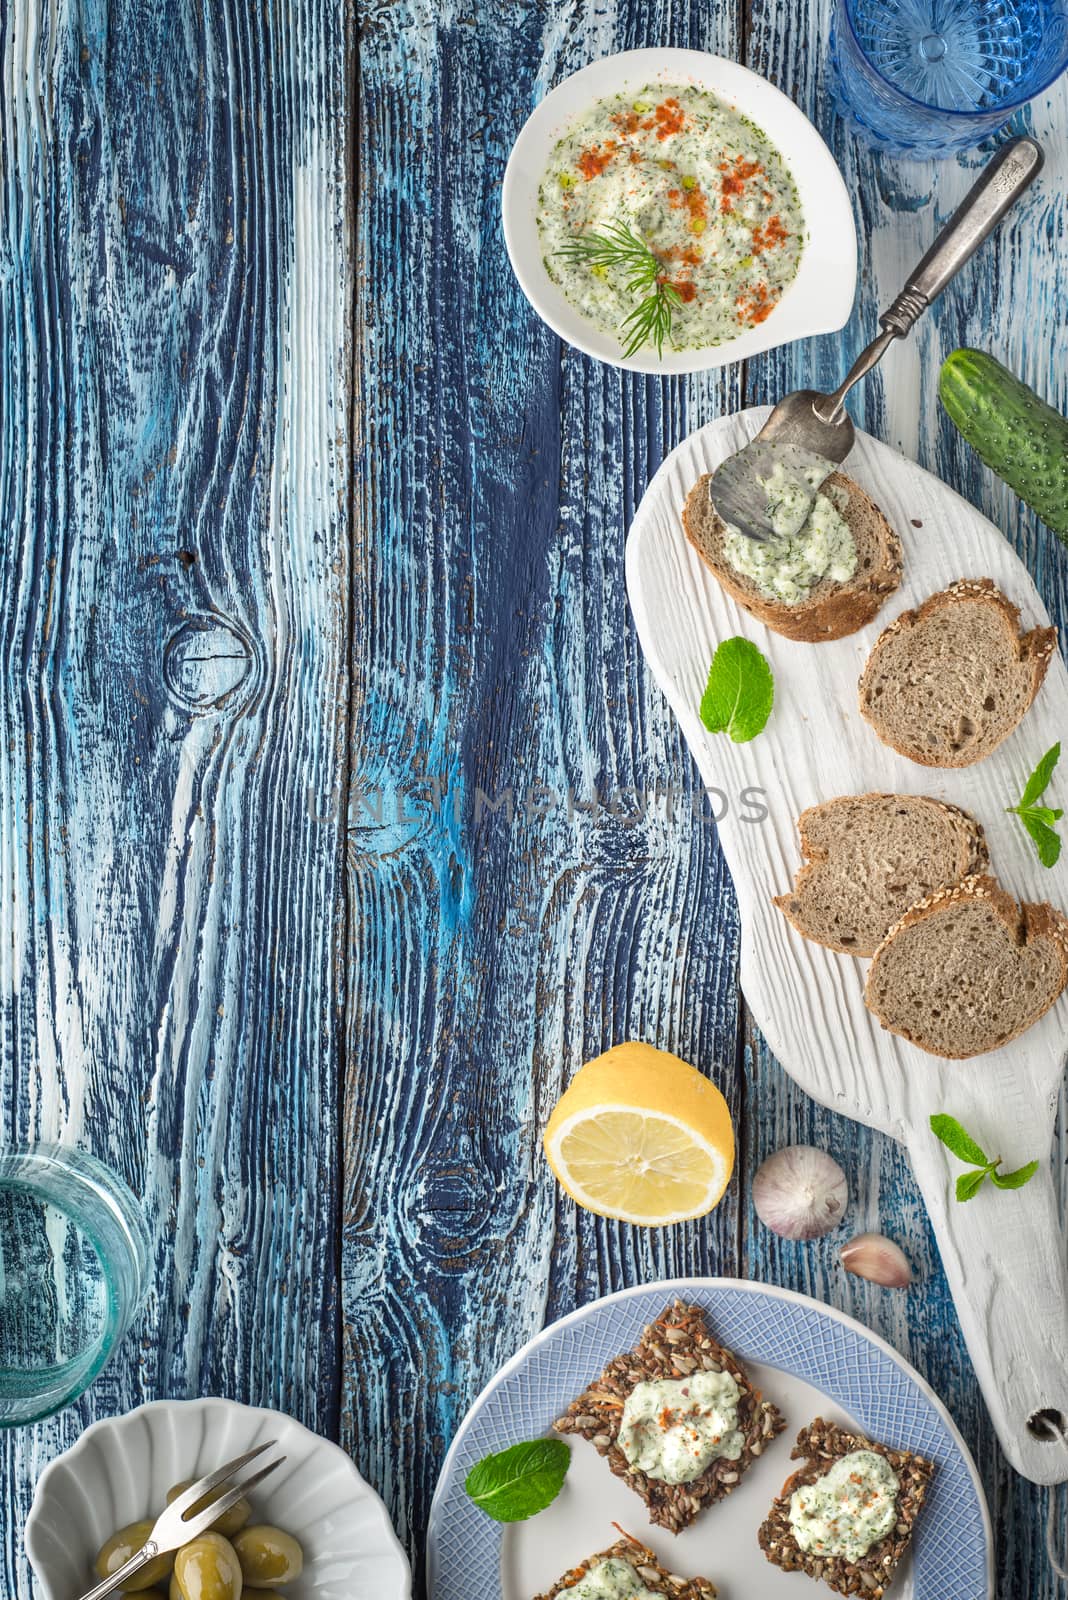 Bread with tzatziki on the blue wooden table with accessorize vertical